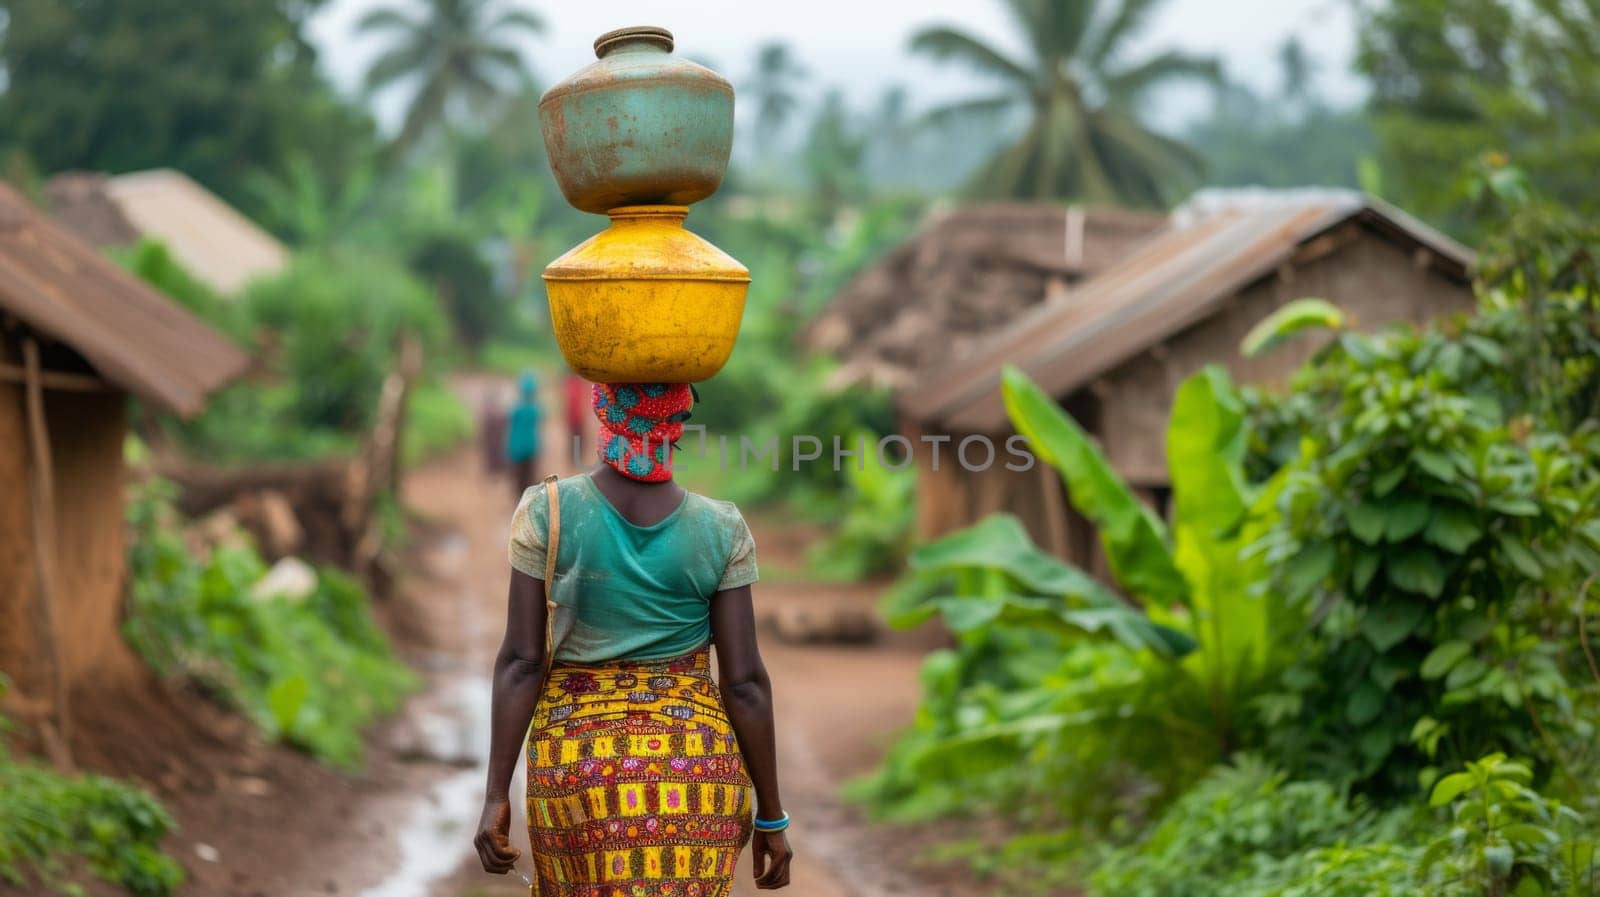 A woman walking down a dirt road with water jugs on her head, AI by starush